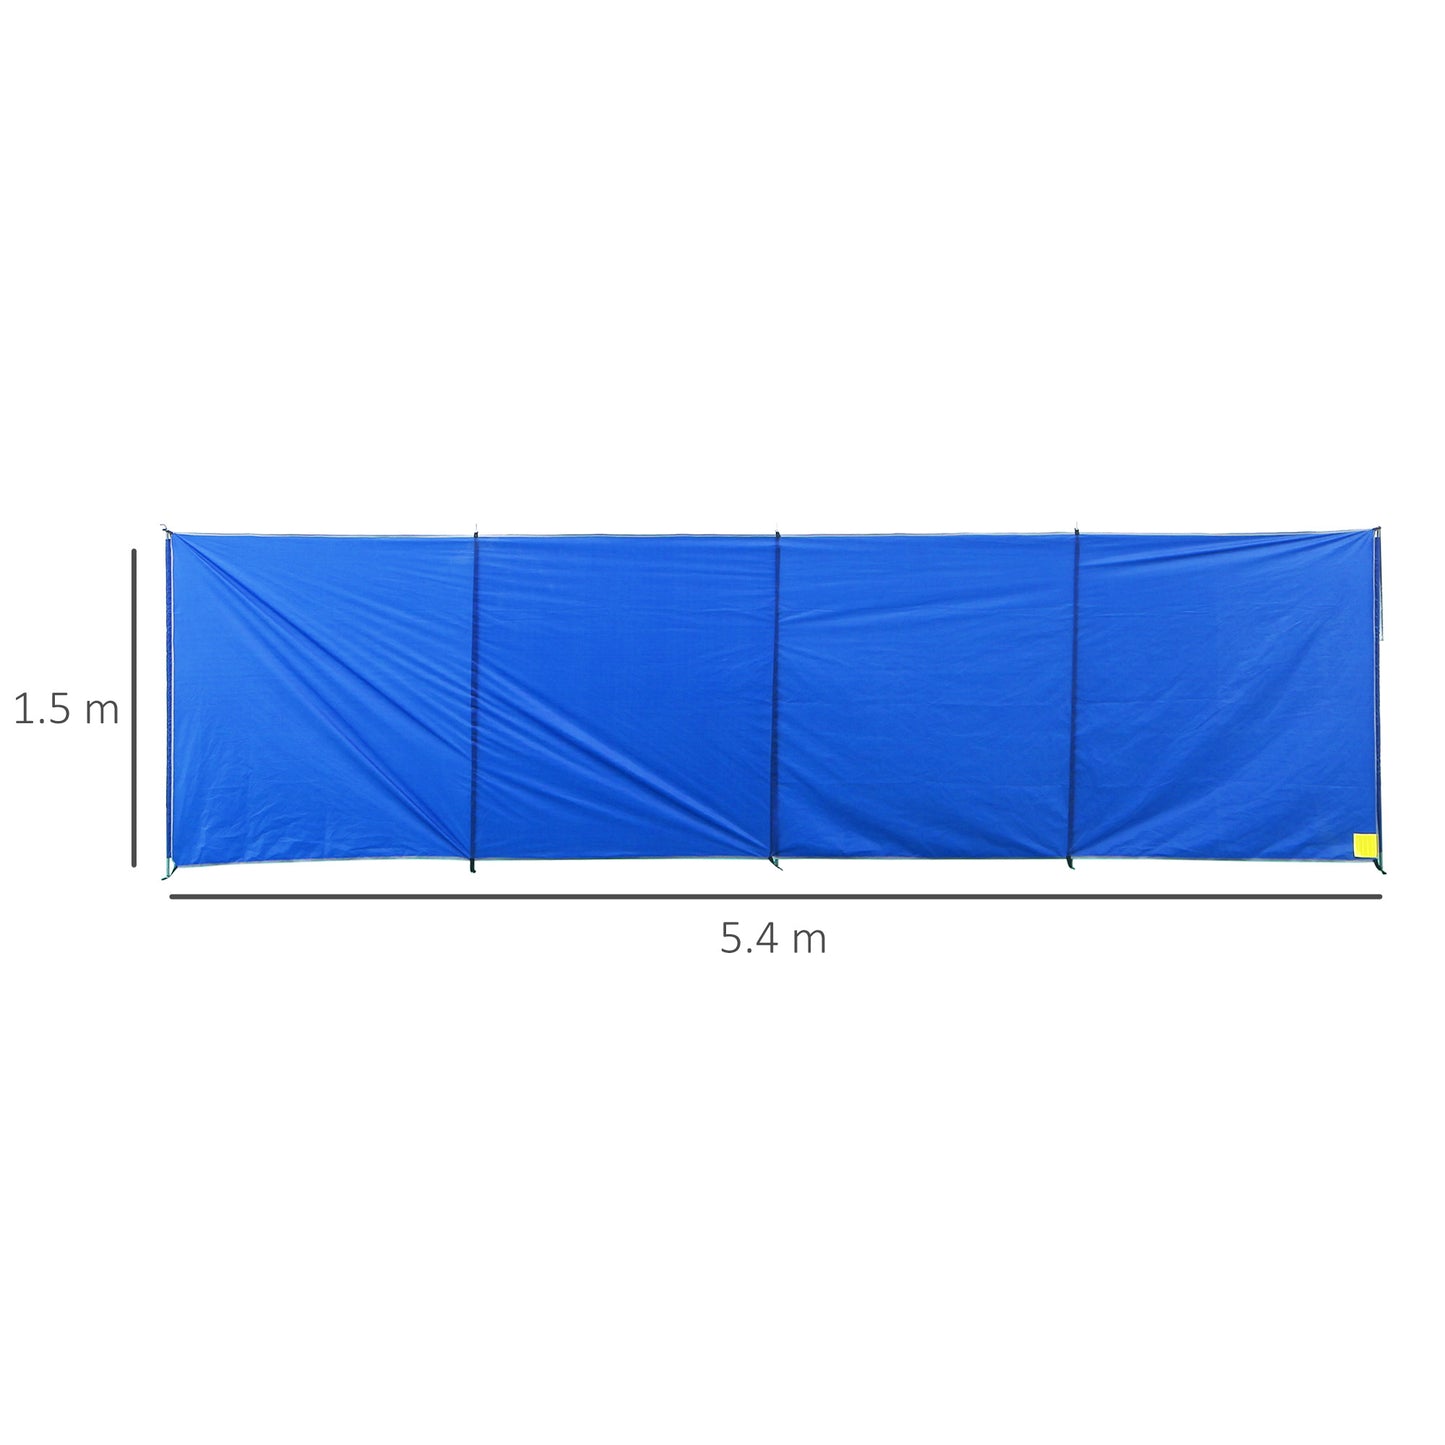 Outsunny Camping Windbreak, Foldable Portable Wind Blocker w/ Carry Bag and Steel Poles, Beach Sun Screen Shelter Privacy Wall, 540cm x 150cm